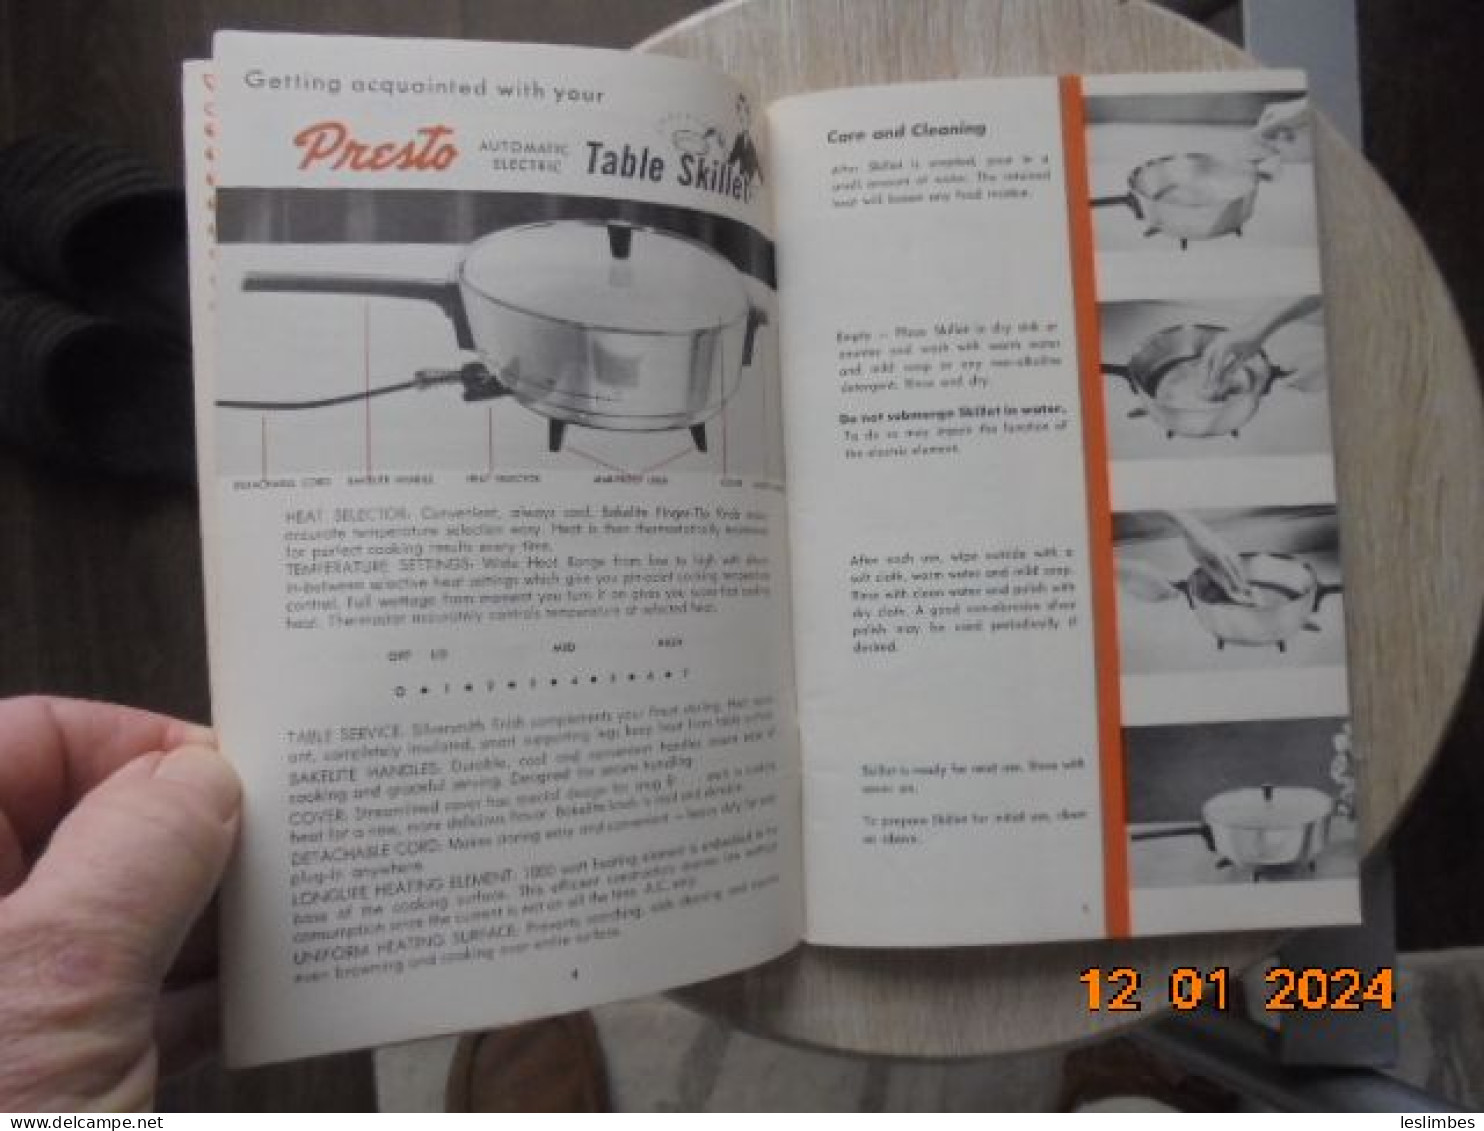 Recipes, Instructions And Time Tables For The National Presto Automatic-Electric Skillet - Américaine